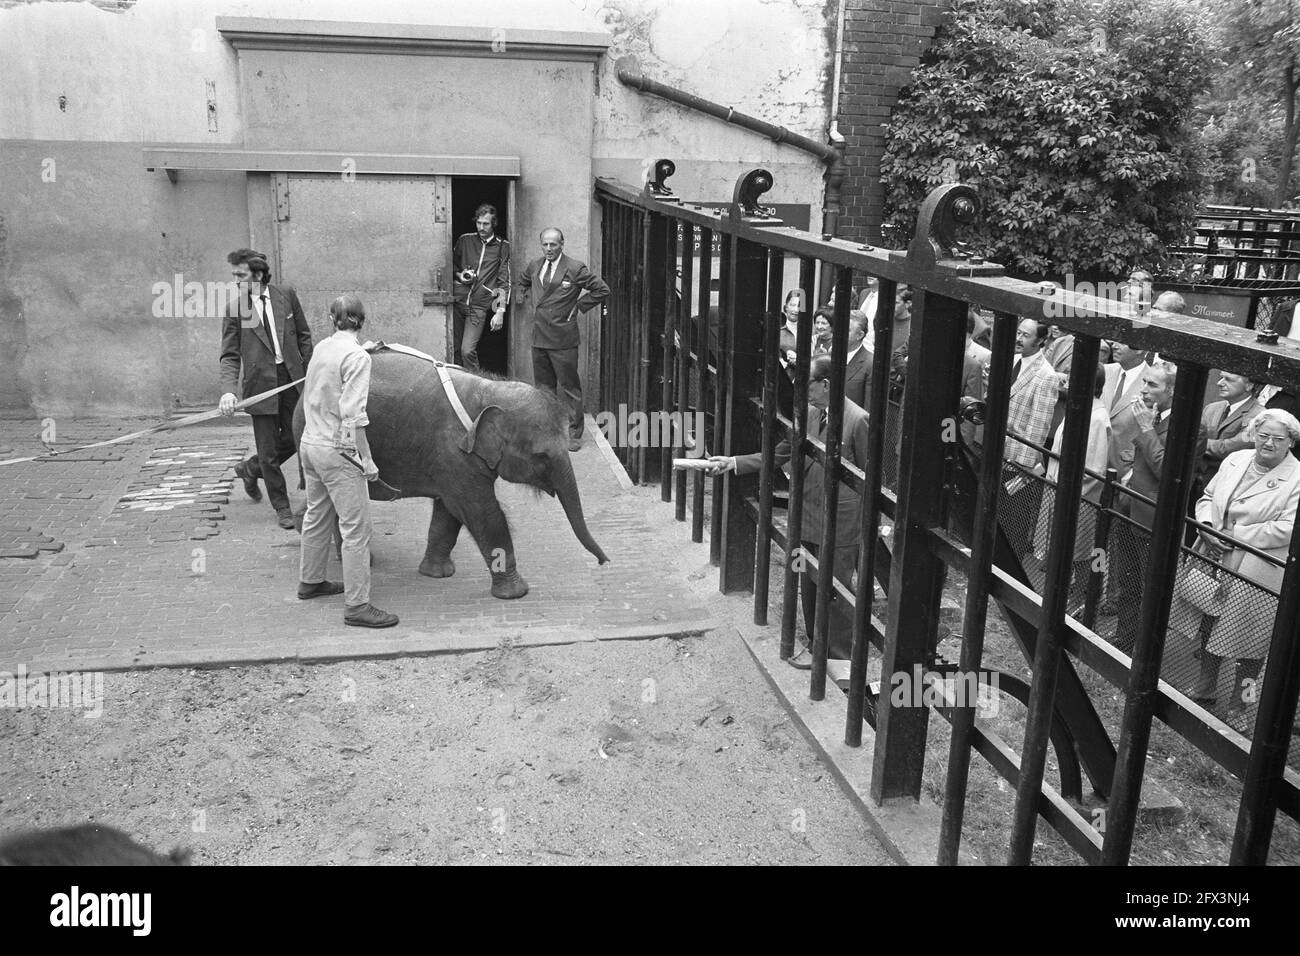 Modernization of elephant enclosures in Artis, Mr. C. L. M. Fock (behind fence) lures baby elephant, July 26, 1972, zoos, fences, modernizations, The Netherlands, 20th century press agency photo, news to remember, documentary, historic photography 1945-1990, visual stories, human history of the Twentieth Century, capturing moments in time Stock Photo